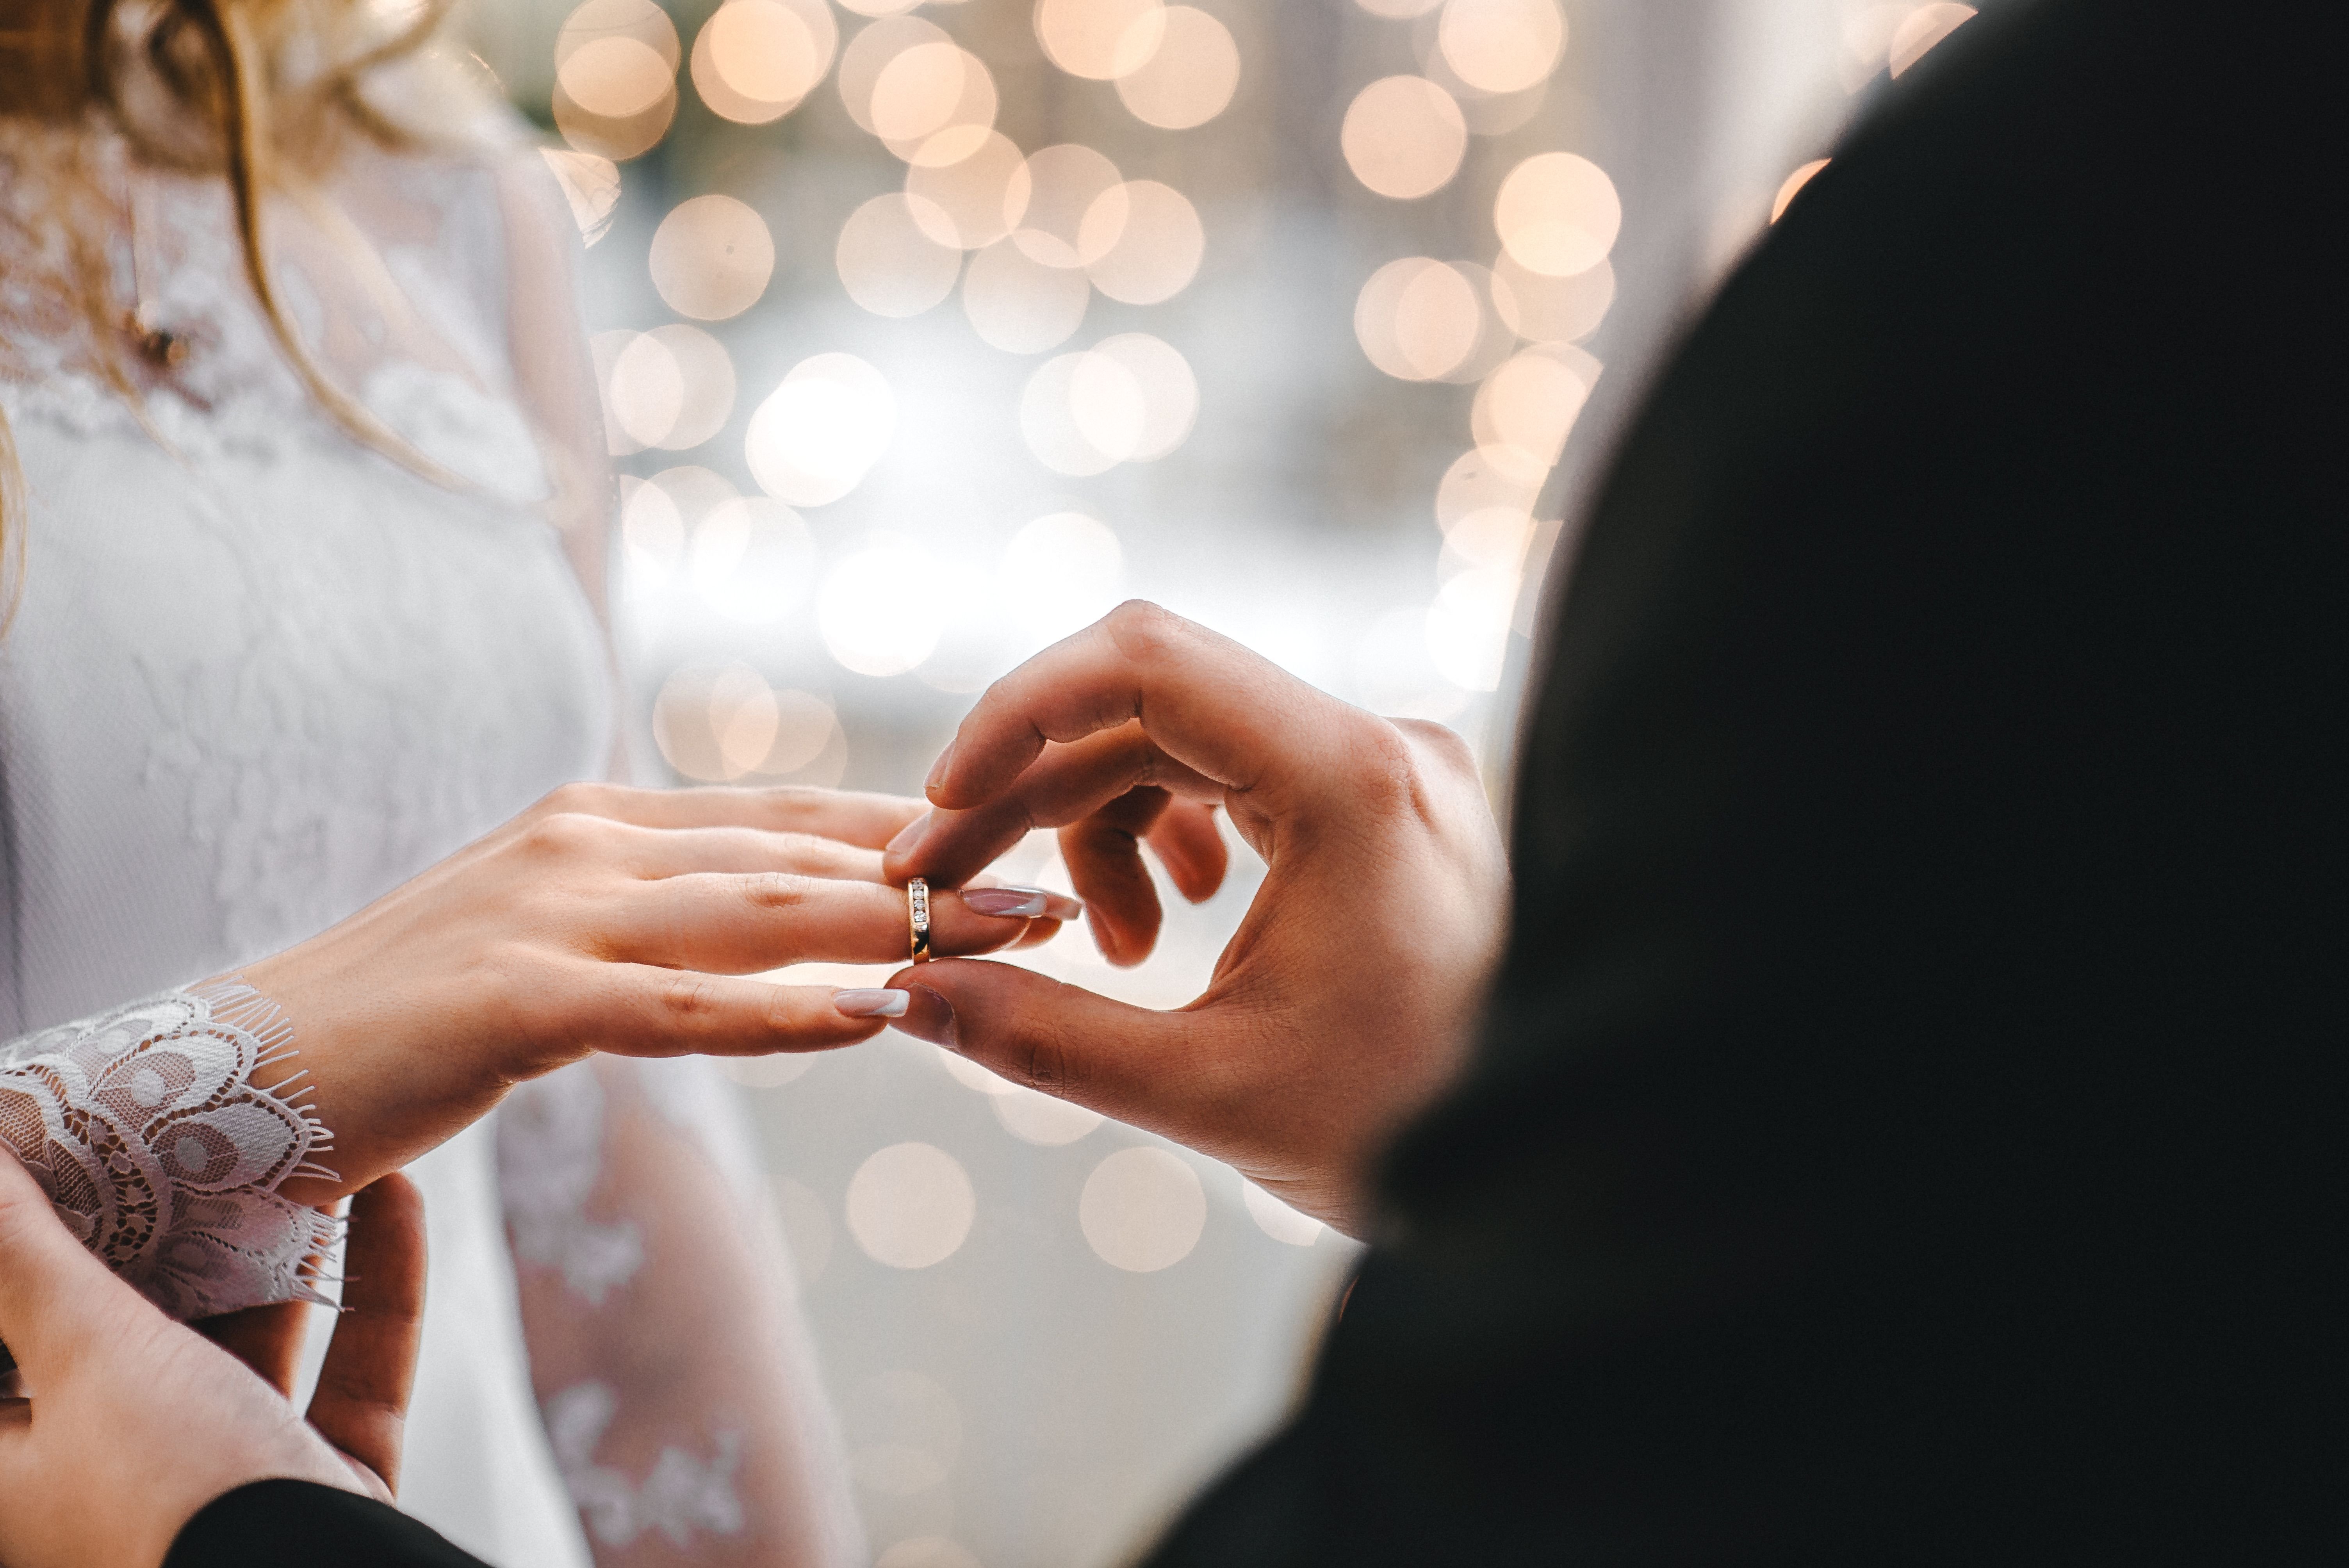 Freda and John got engaged but she had no love for him | Source: Pexels